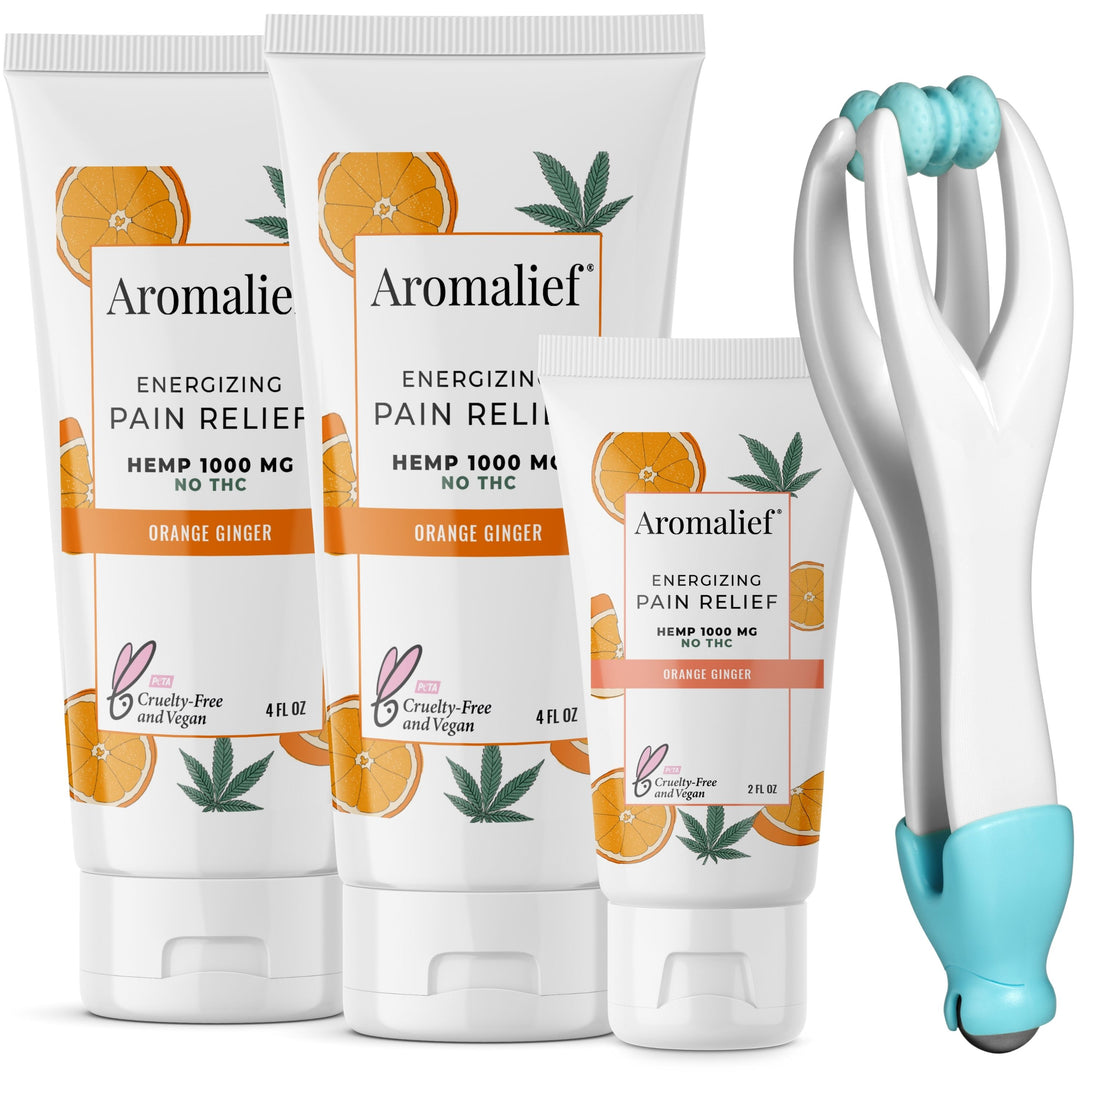 Aromalief Pain Relief Creams and Finger Massager Bundle